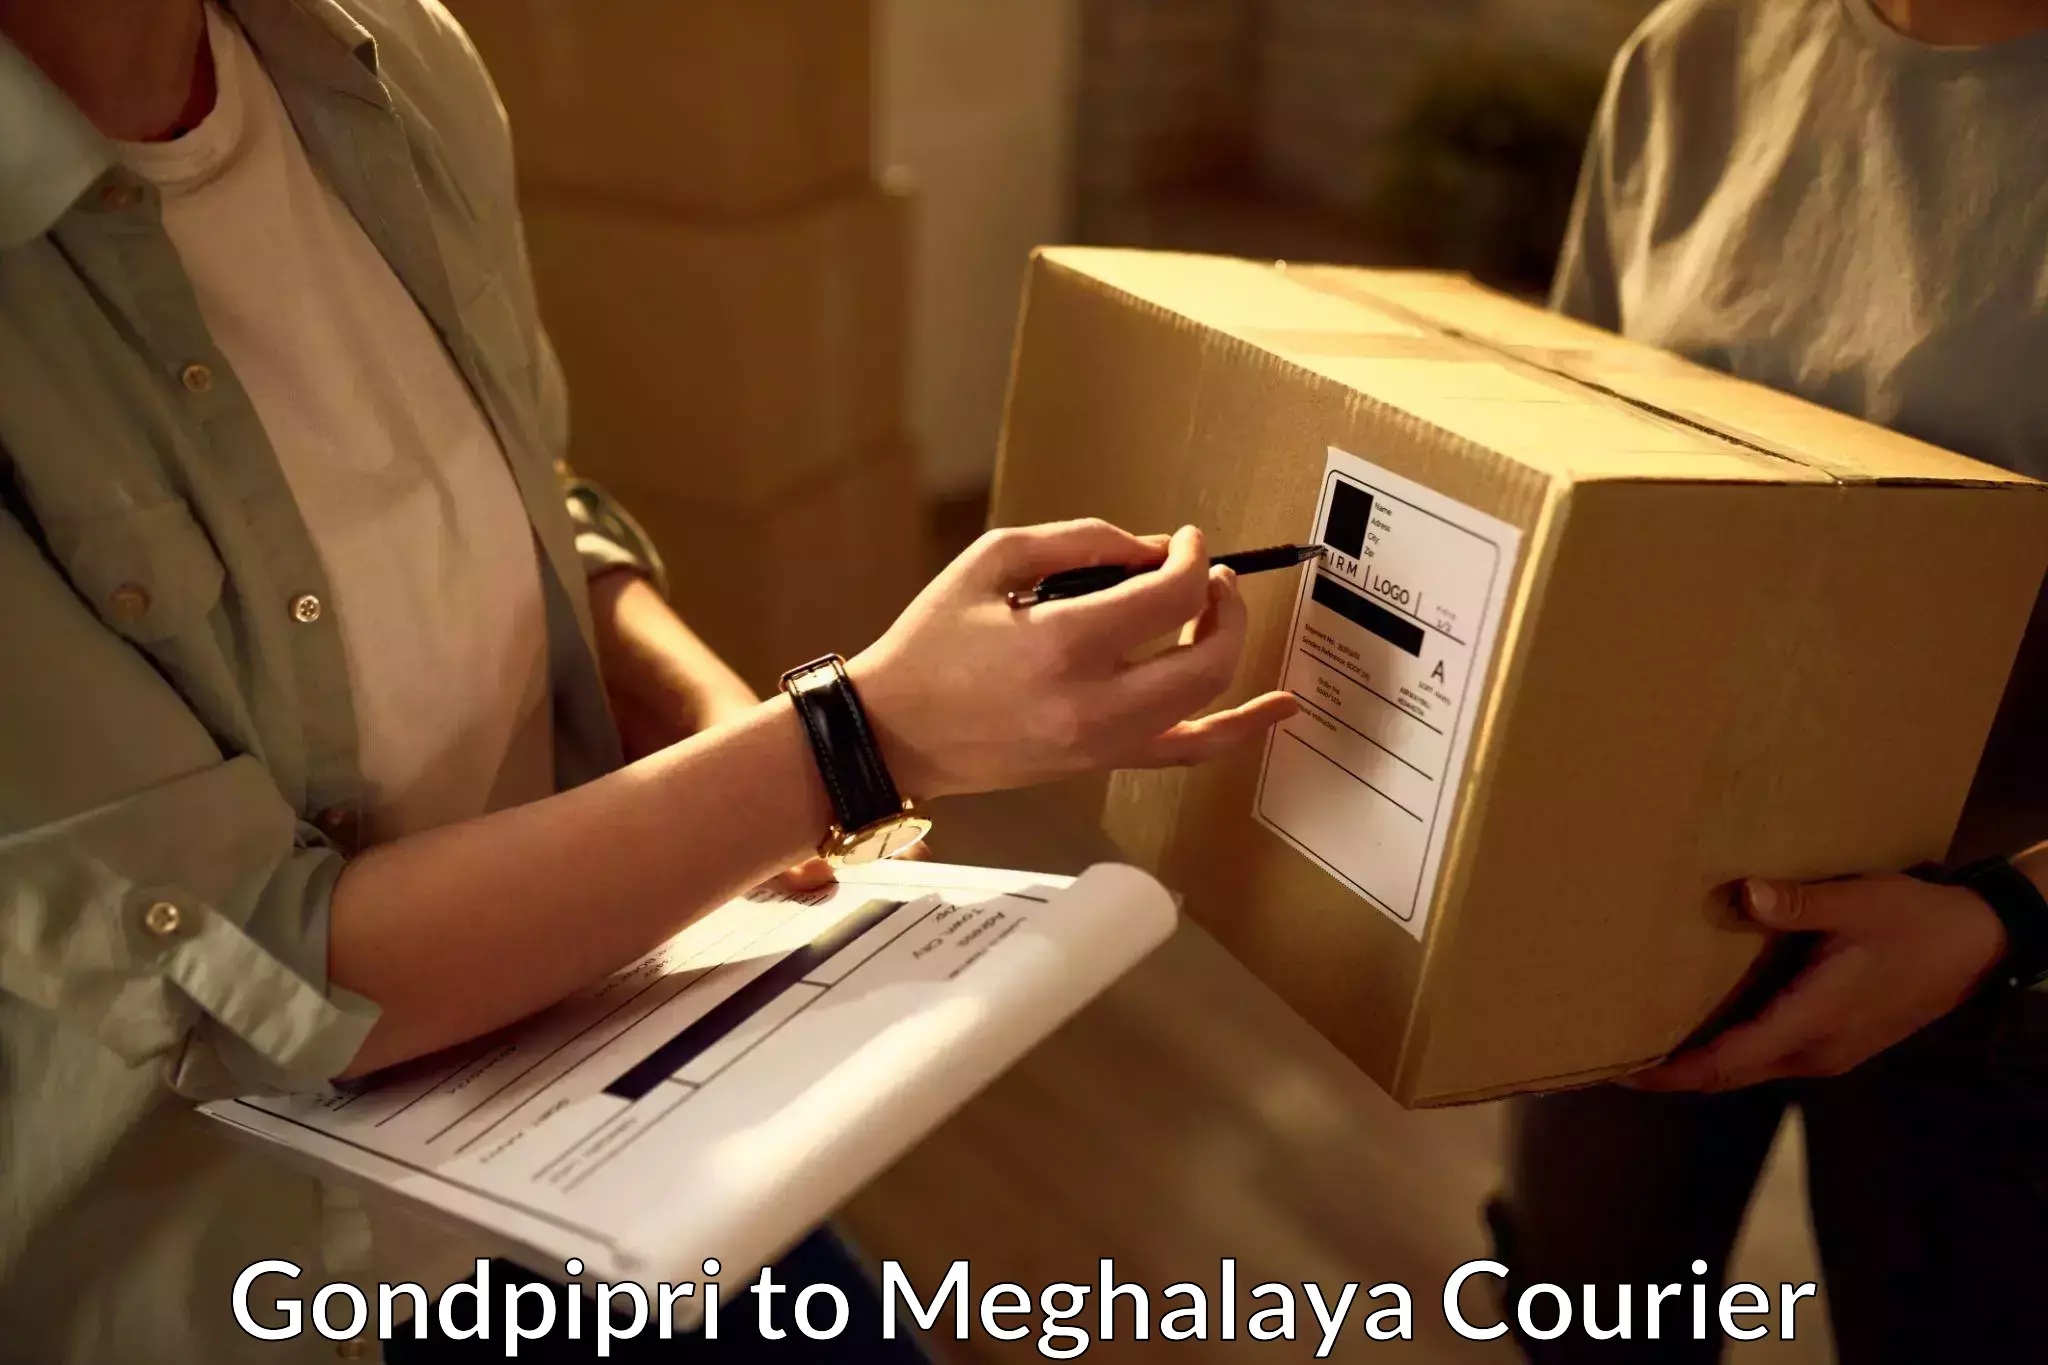 Courier service innovation Gondpipri to Shillong